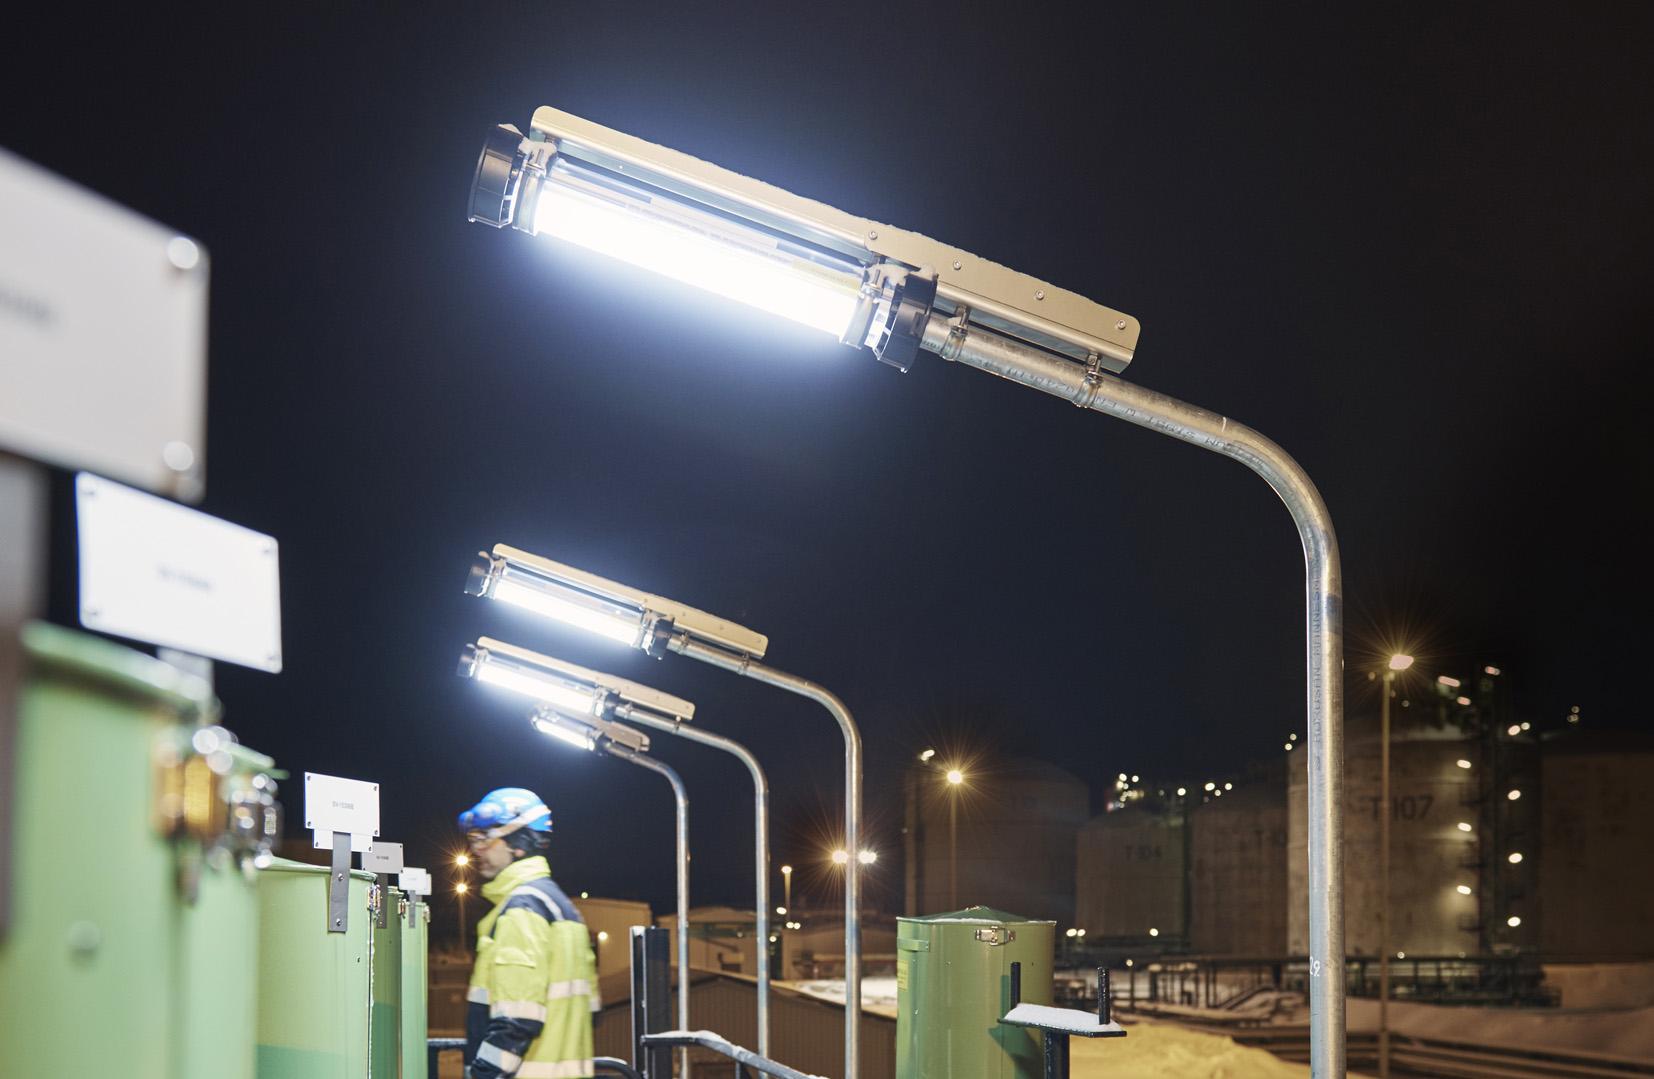 ATEX certified SLAM FIXED area lights installed to poles.